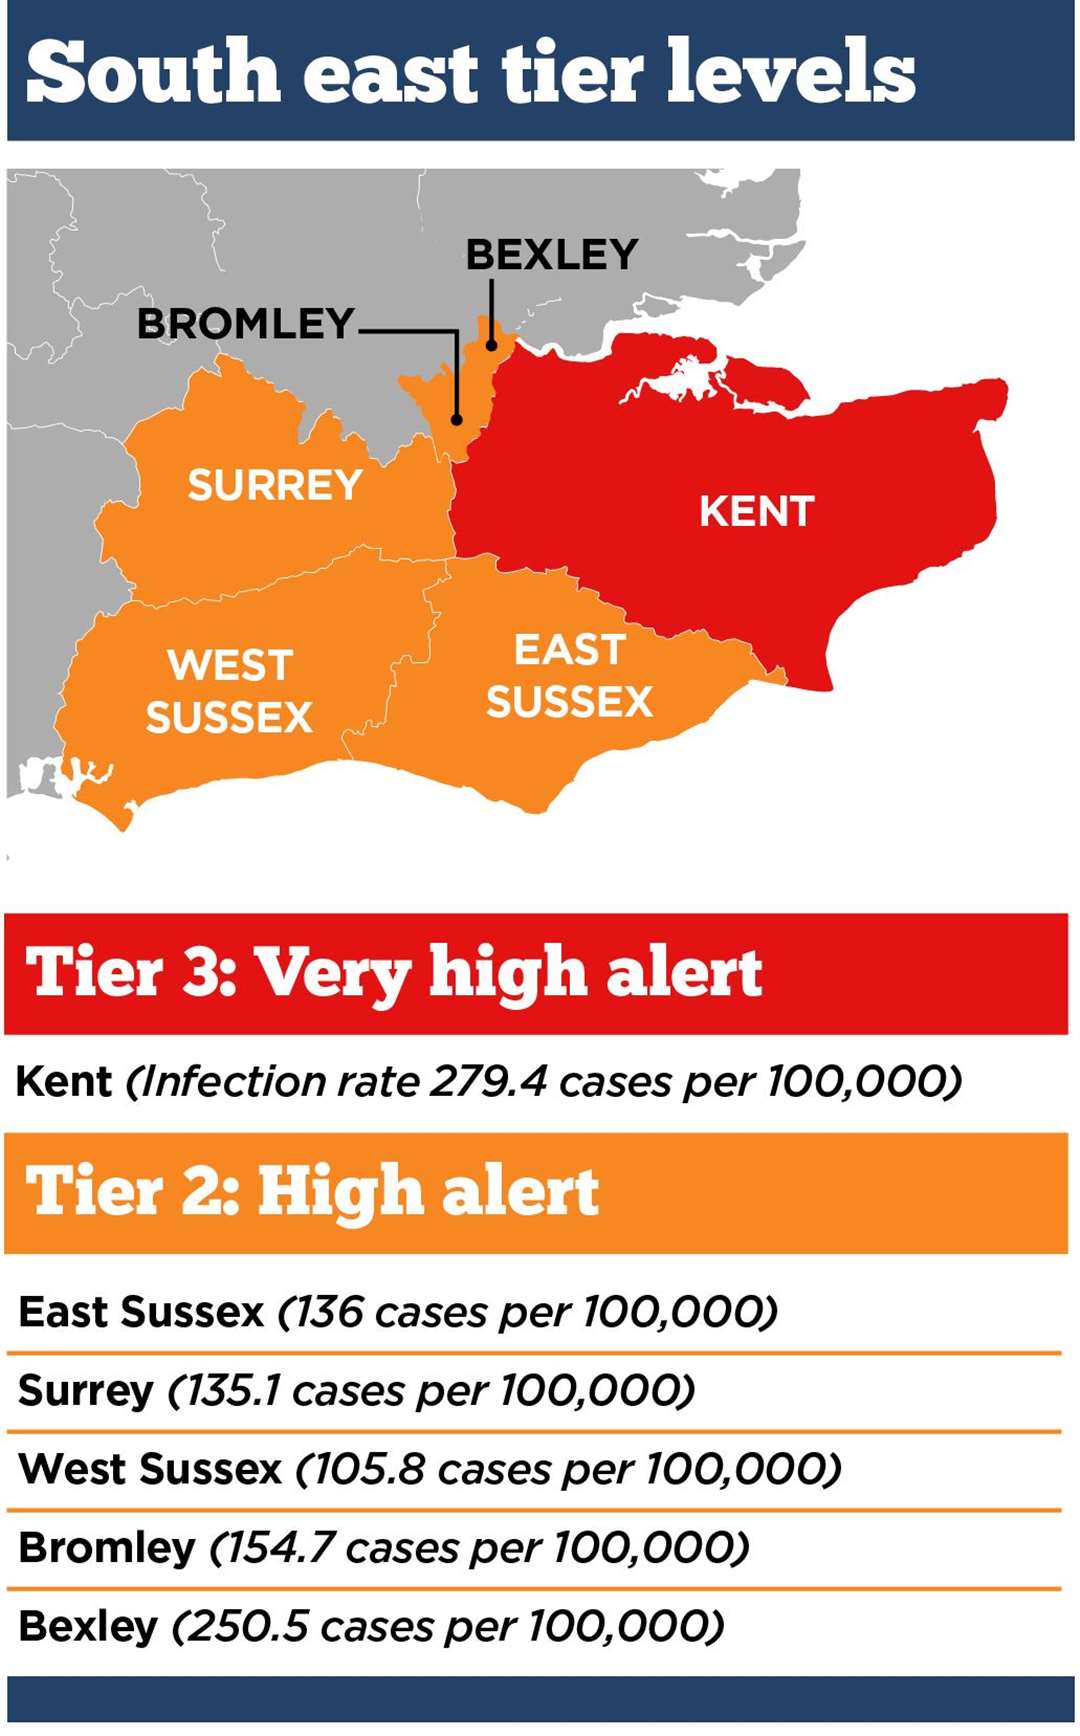 All neighbouring counties - as well as the whole of London - have been placed in Tier 2